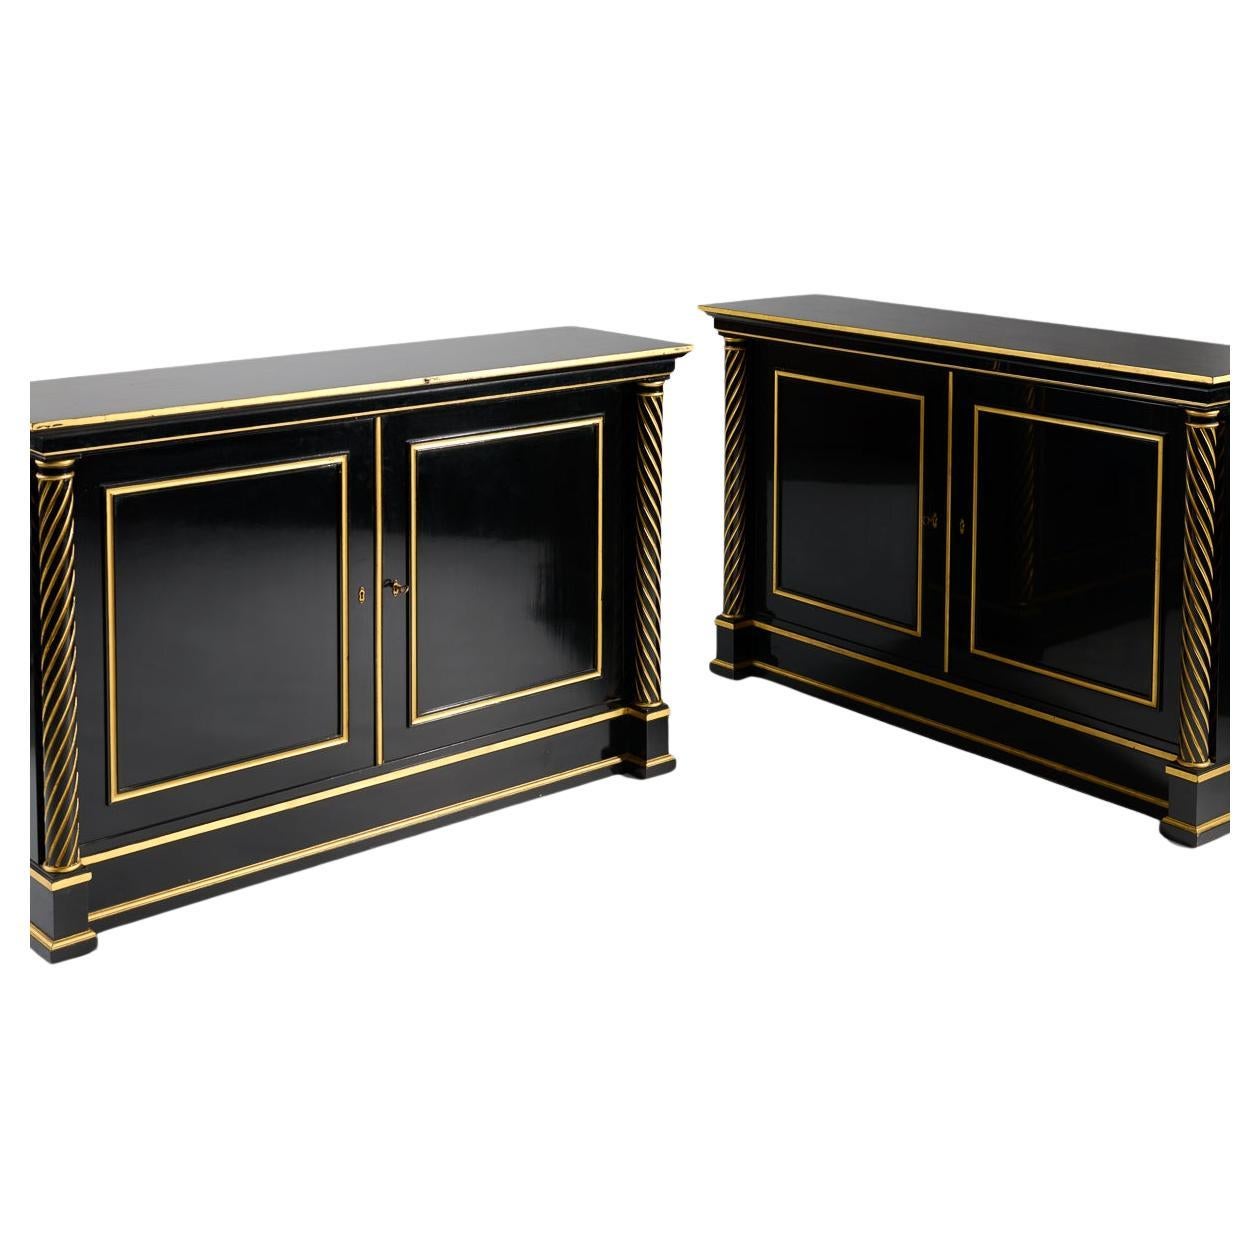 French Maison Jansen, Pair of Black Lacquer Cabinets, France, 1965 For Sale